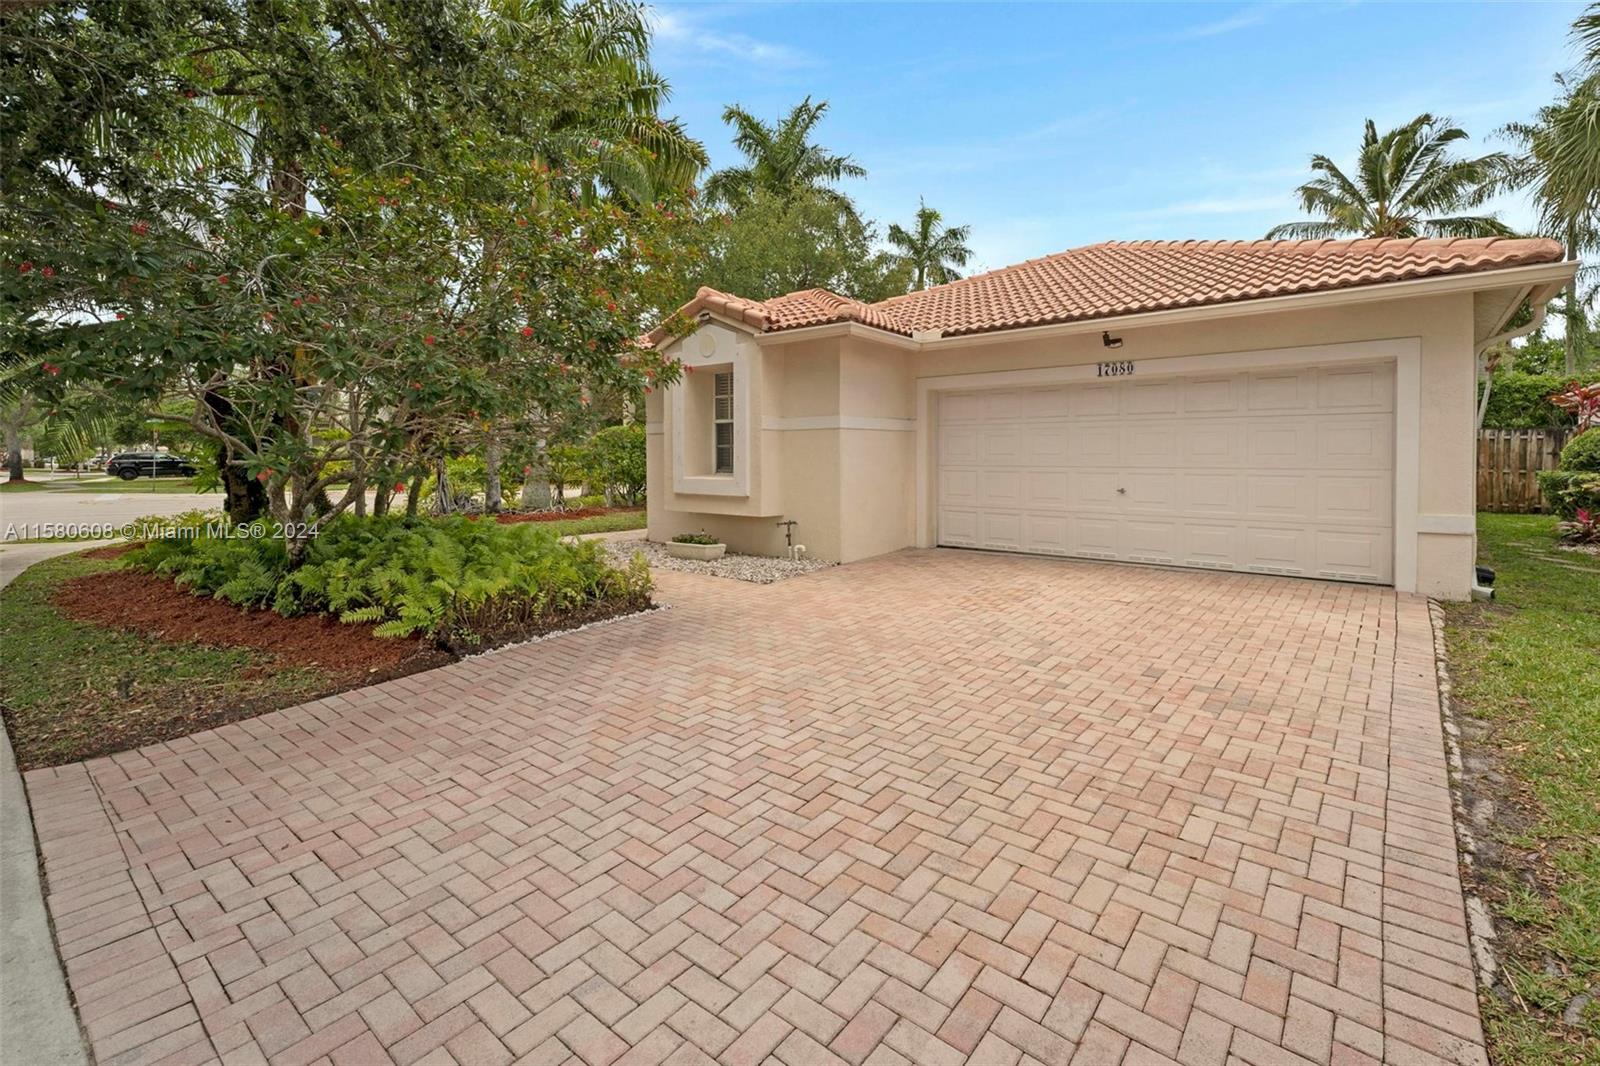 17080 Nw 10th St, Pembroke Pines, Miami-Dade County, Florida - 3 Bedrooms  
2 Bathrooms - 